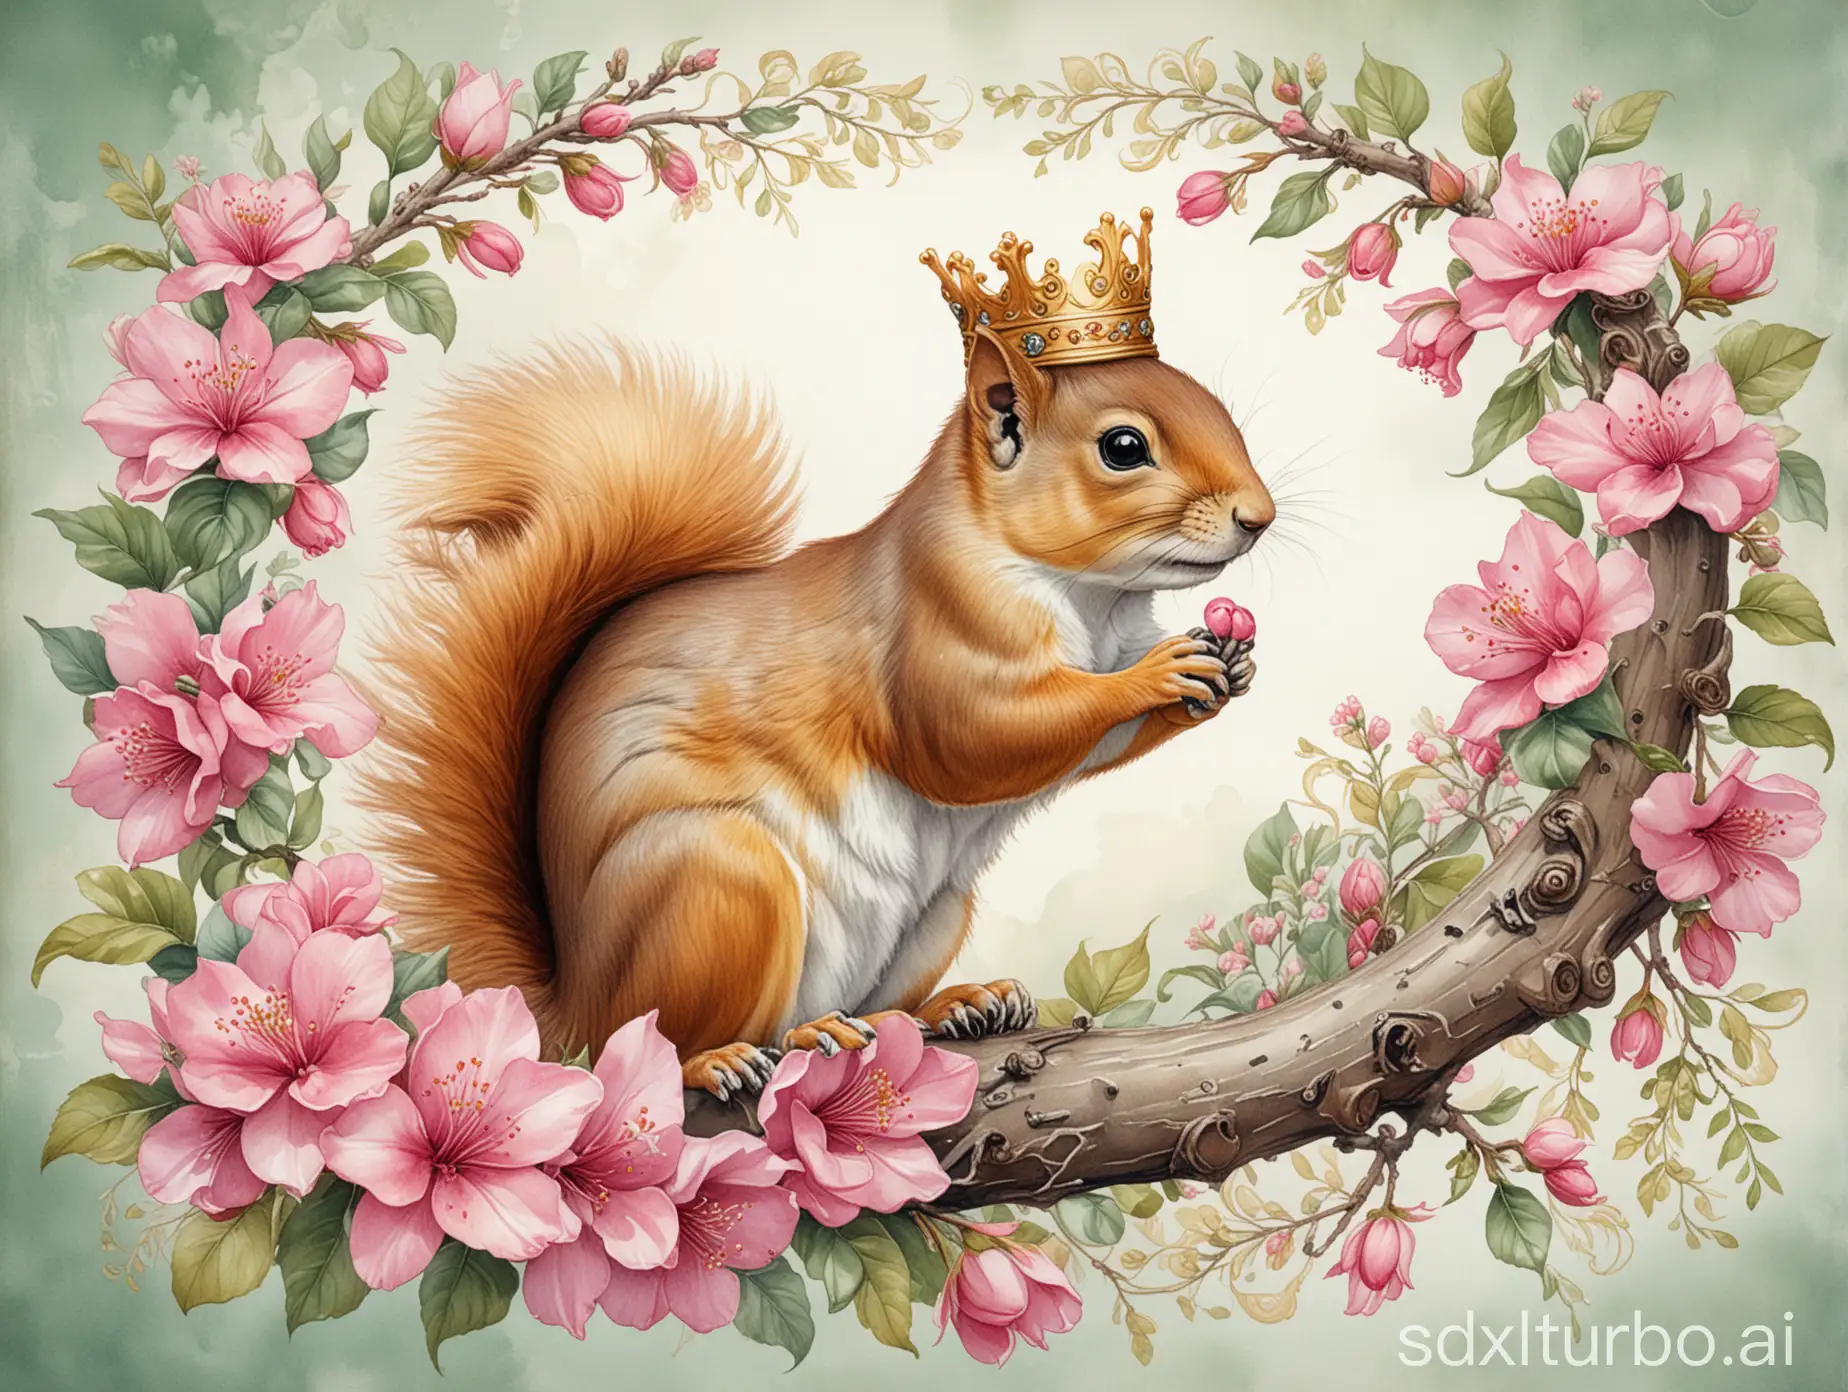 Regal-Squirrel-Perched-on-Blossoming-Branch-Intricately-Detailed-Watercolor-Art